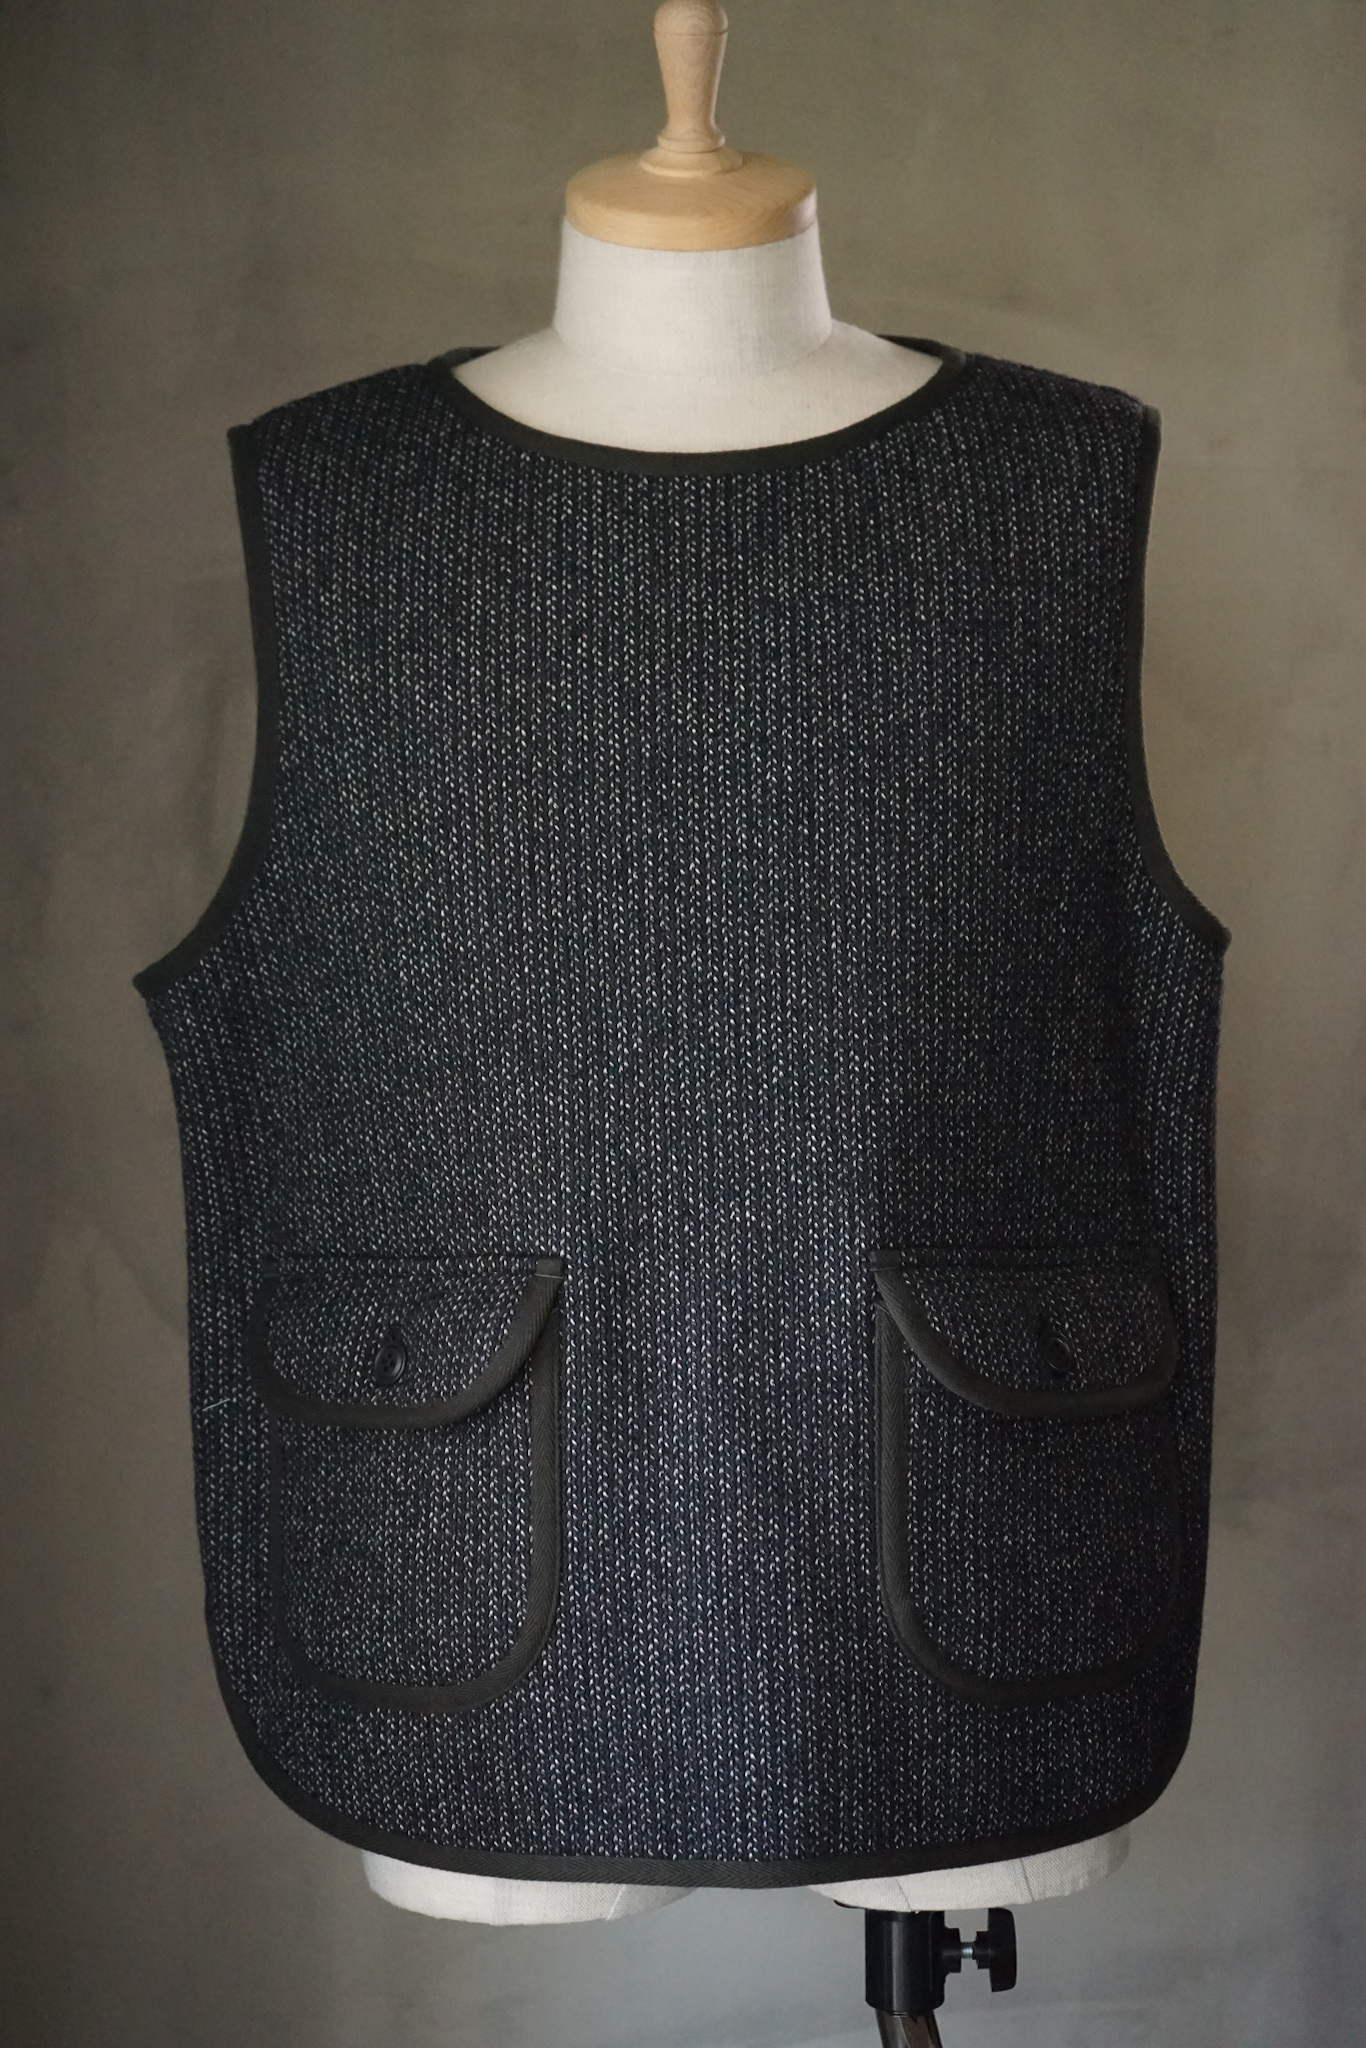 DUCK HUNTING VEST - MOJITO - ARCH ONLINE SHOP